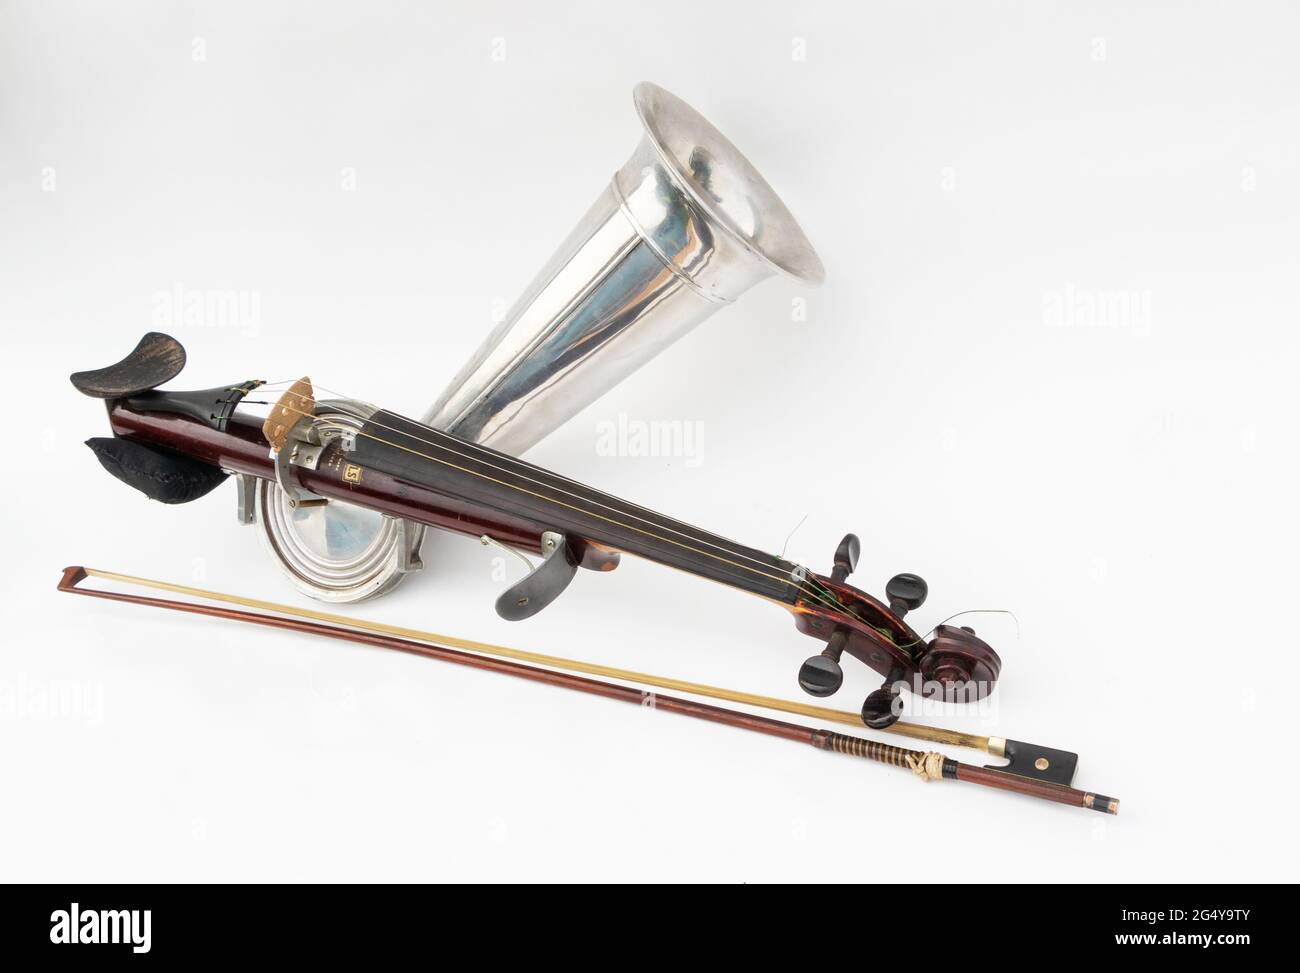 A Stroh violin or phonofiddle or stroviol musical recording instrument with bow on a white studio background Stock Photo - Alamy